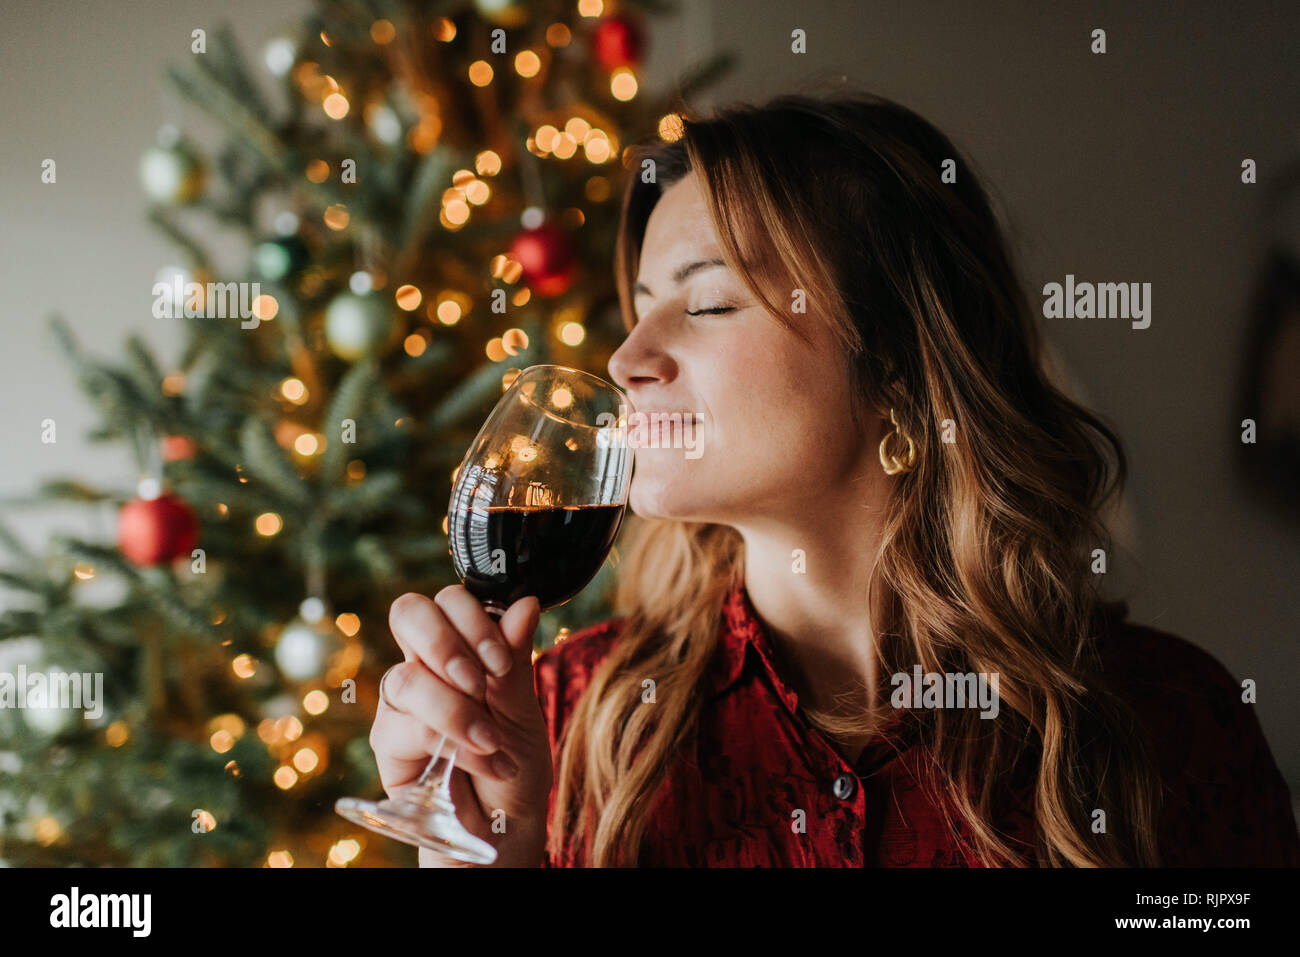 Woman smelling glass of wine beside decorated Christmas tree Stock Photo